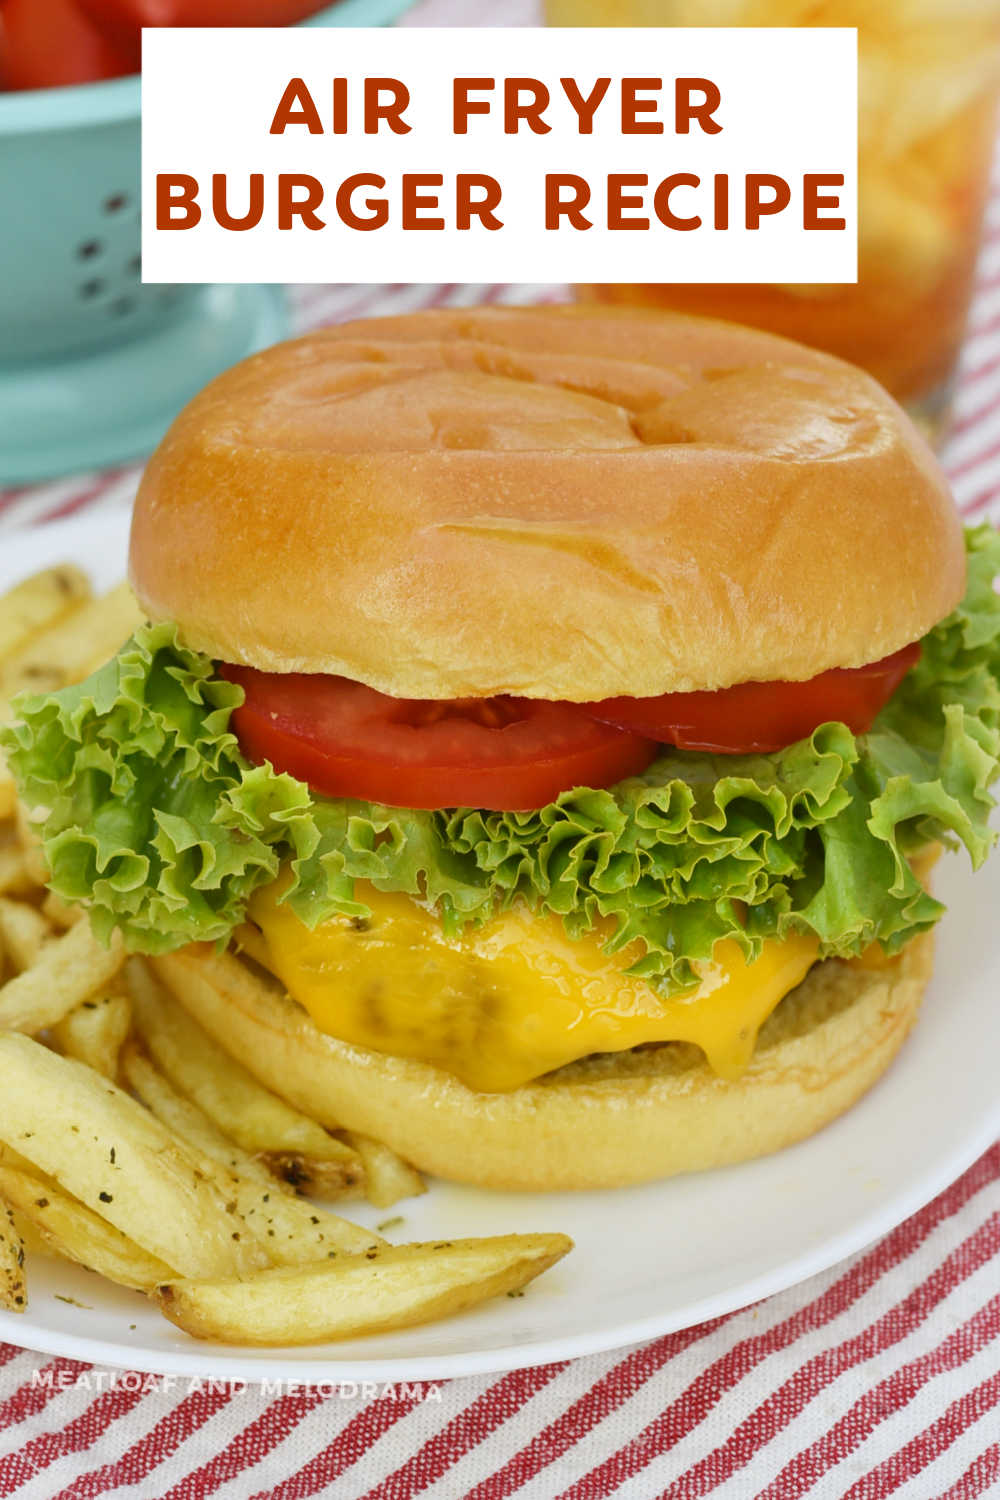 Make Juicy Air Fryer Hamburgers or cheeseburgers in just 15 minutes with this easy air fryer burger recipe. Enjoy delicious burgers anytime in any weather! via @meamel